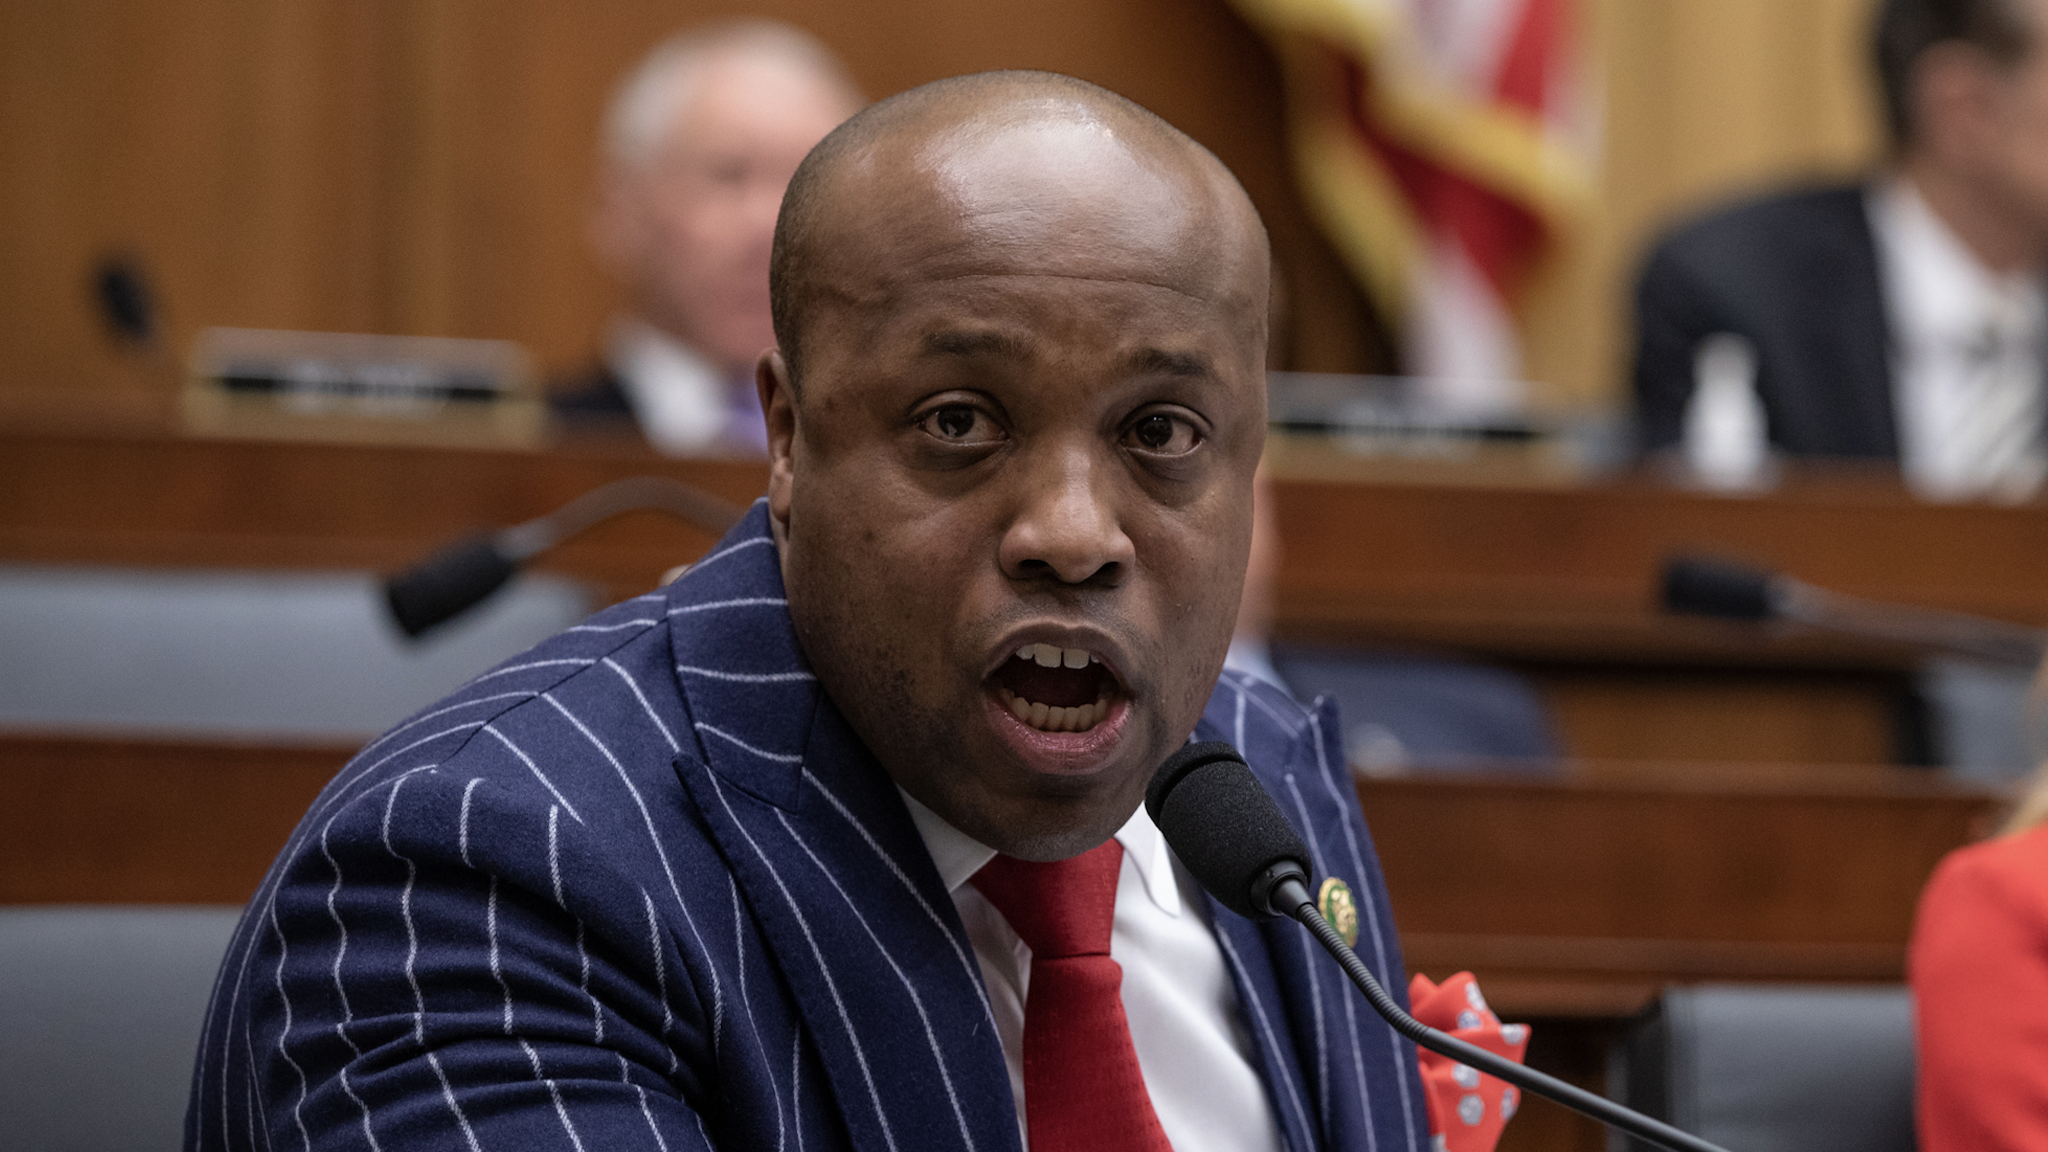 Representative Wesley Hunt, a Republican from Texas, speaks during a House Judiciary Committee hearing in Washington, DC, US, on Wednesday, Feb. 1, 2023. The hearing is examining border security, national security, and how fentanyl impacts American lives.